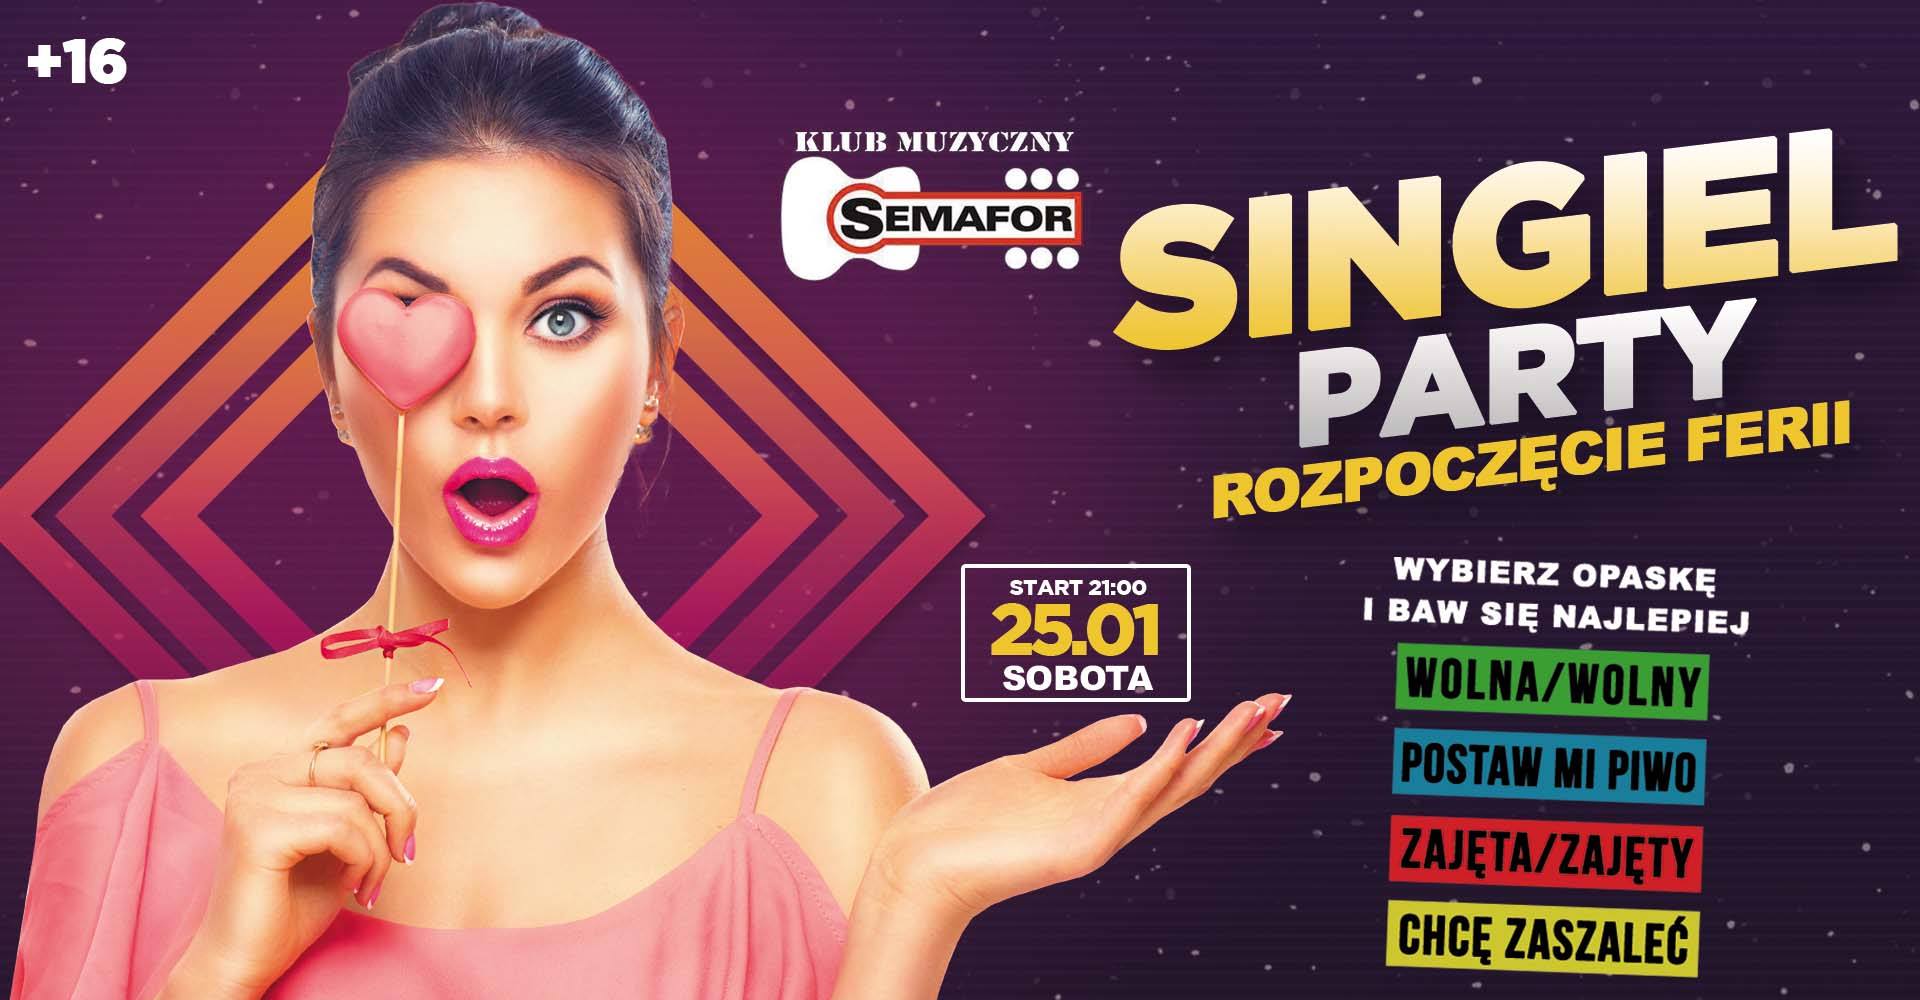 You are currently viewing ★ Licealne Singiel Party ★ Rozpoczęcie Ferii ★ Semafor ★ 16+